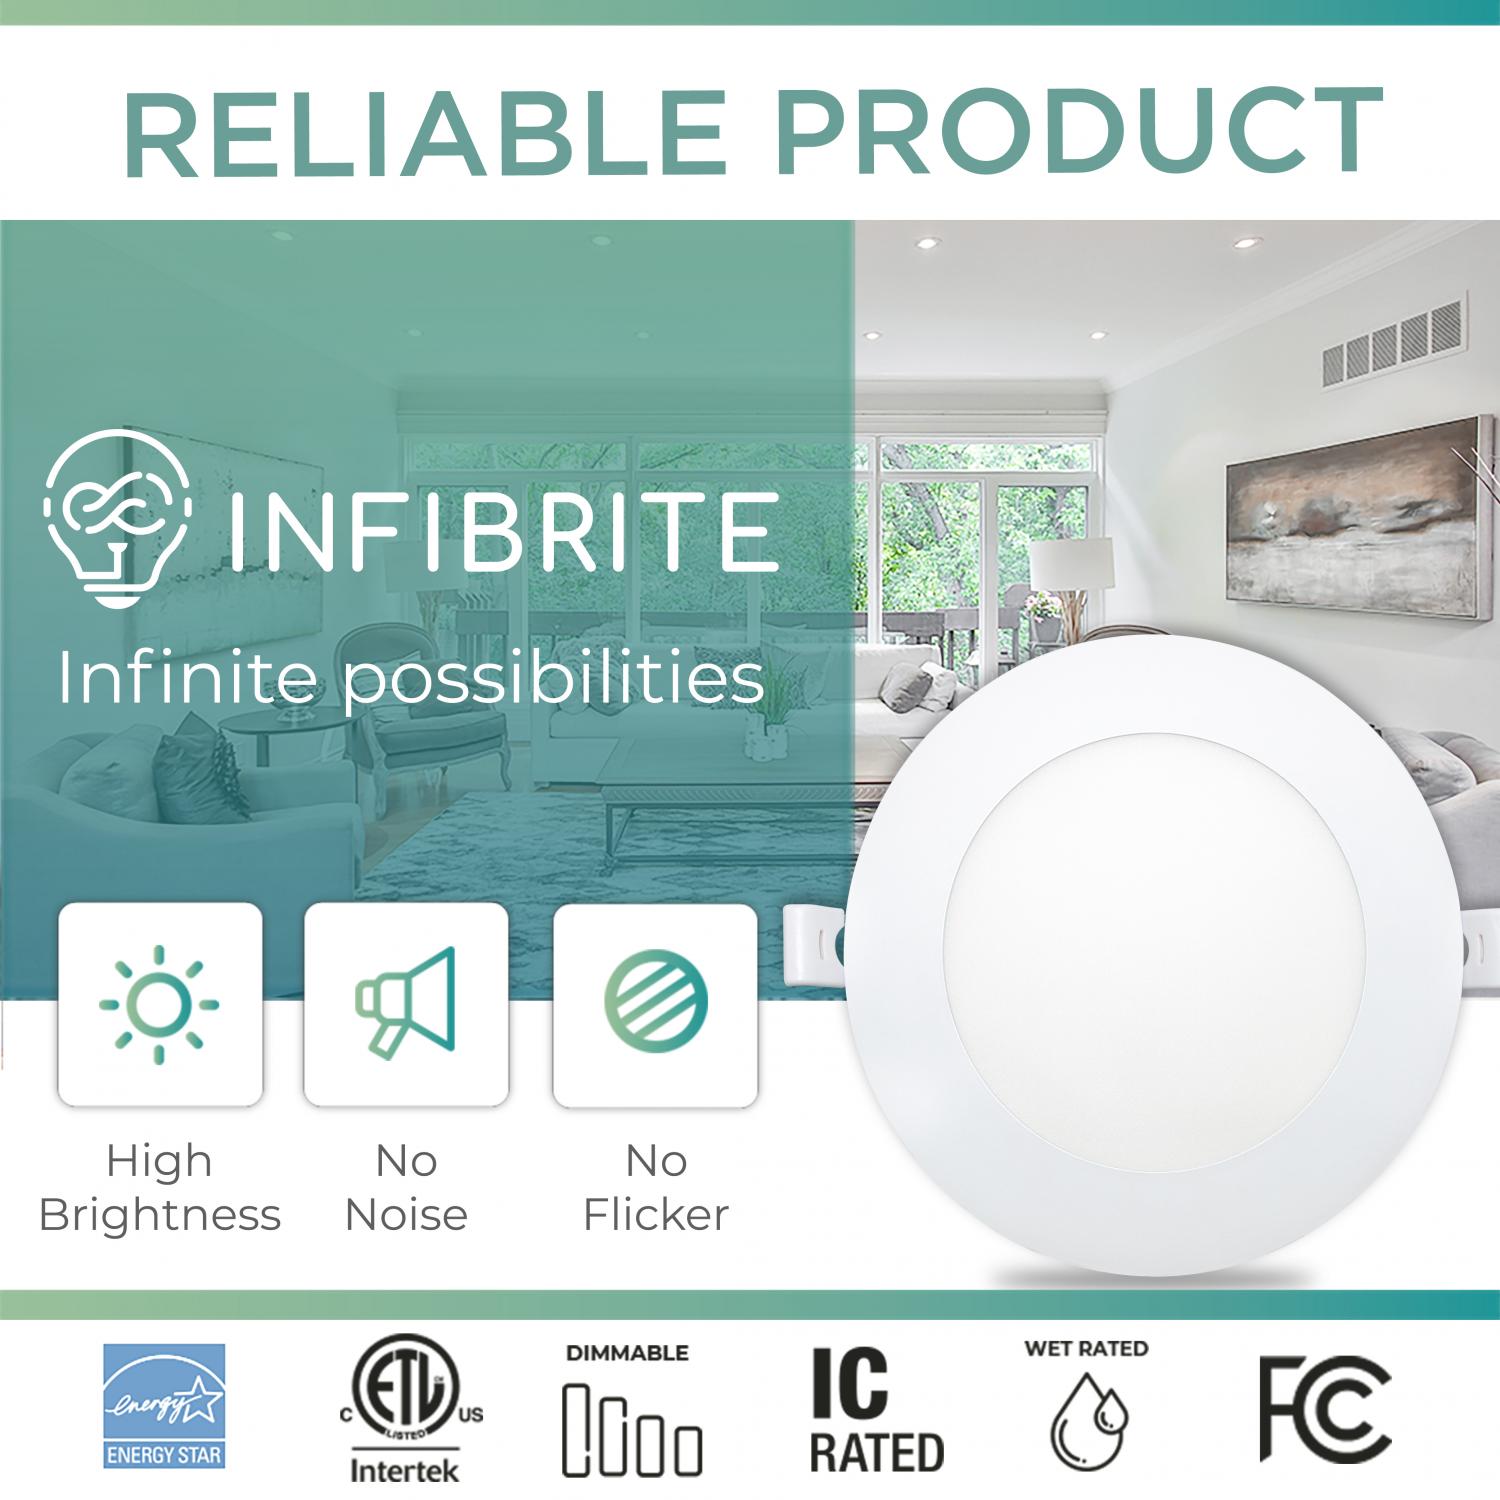 Infibrite 4 Inch 3000K/4000K/5000K Selectable 9W 750 LM Ultra-Slim LED Ceiling Light with Junction Box, Flush Mount, Dimmable, Fixture for Bedroom, Wet Rated for Bathroom, Easy Install, 75W Eqv, ETL & Energy Star, US Company (24 Pack)